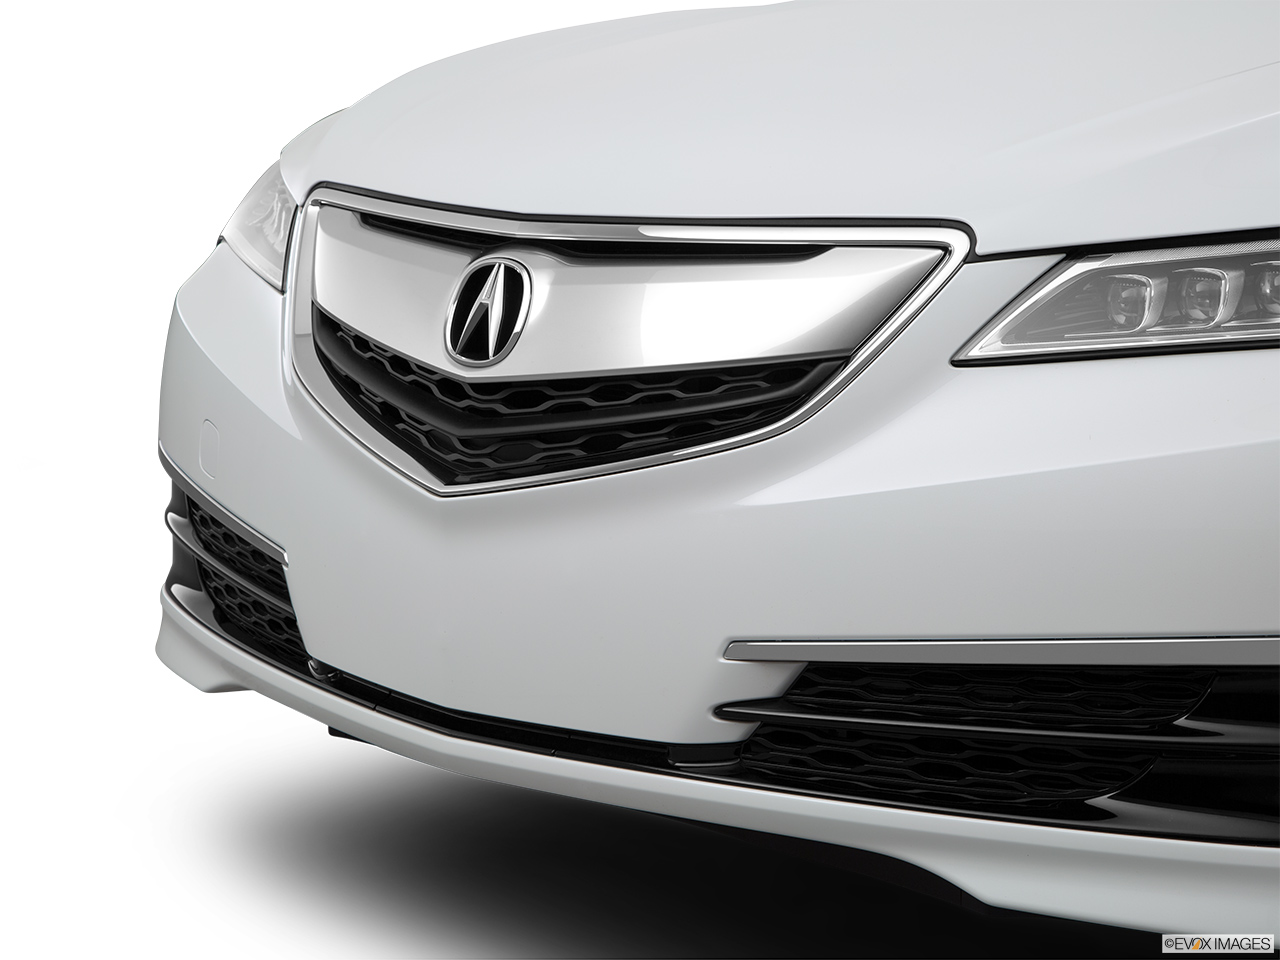 2015 Acura TLX 3.5 V-6 9-AT SH-AWD Close up of Grill. 